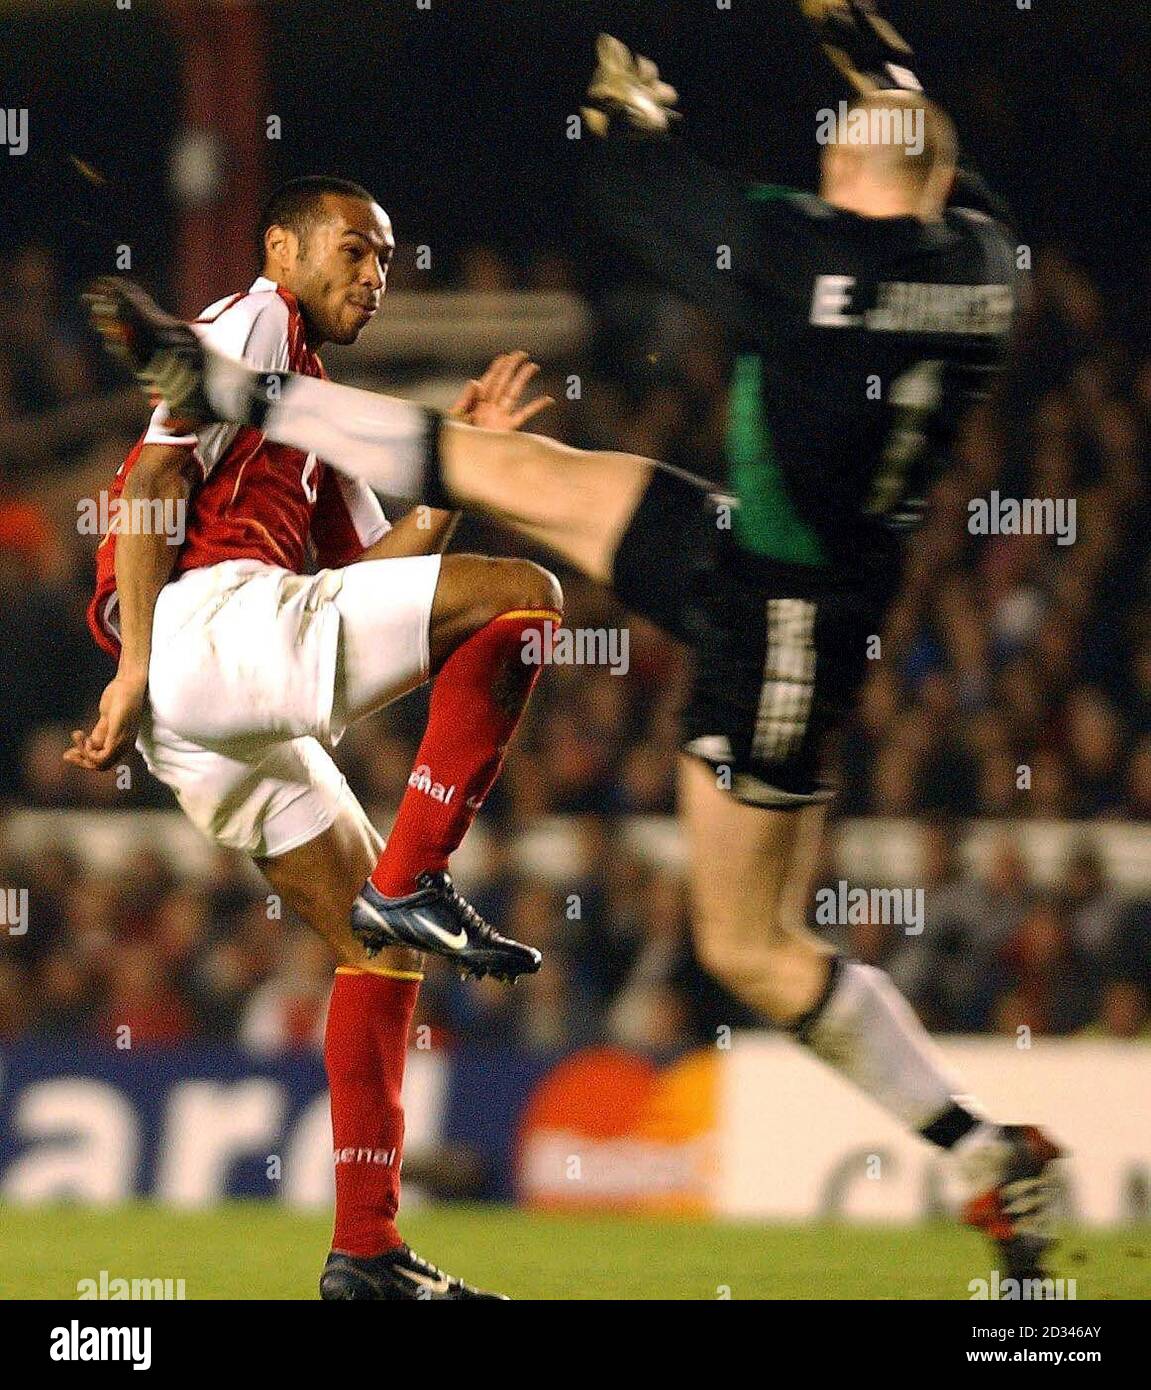 Arsenal striker Thierry Henry lobs the ball to score the second goal past Rosenborg goalkeeper Espen Johnsen (right) during the UEFA Champions League, Group E match at Highbury Stadium, London. Stock Photo